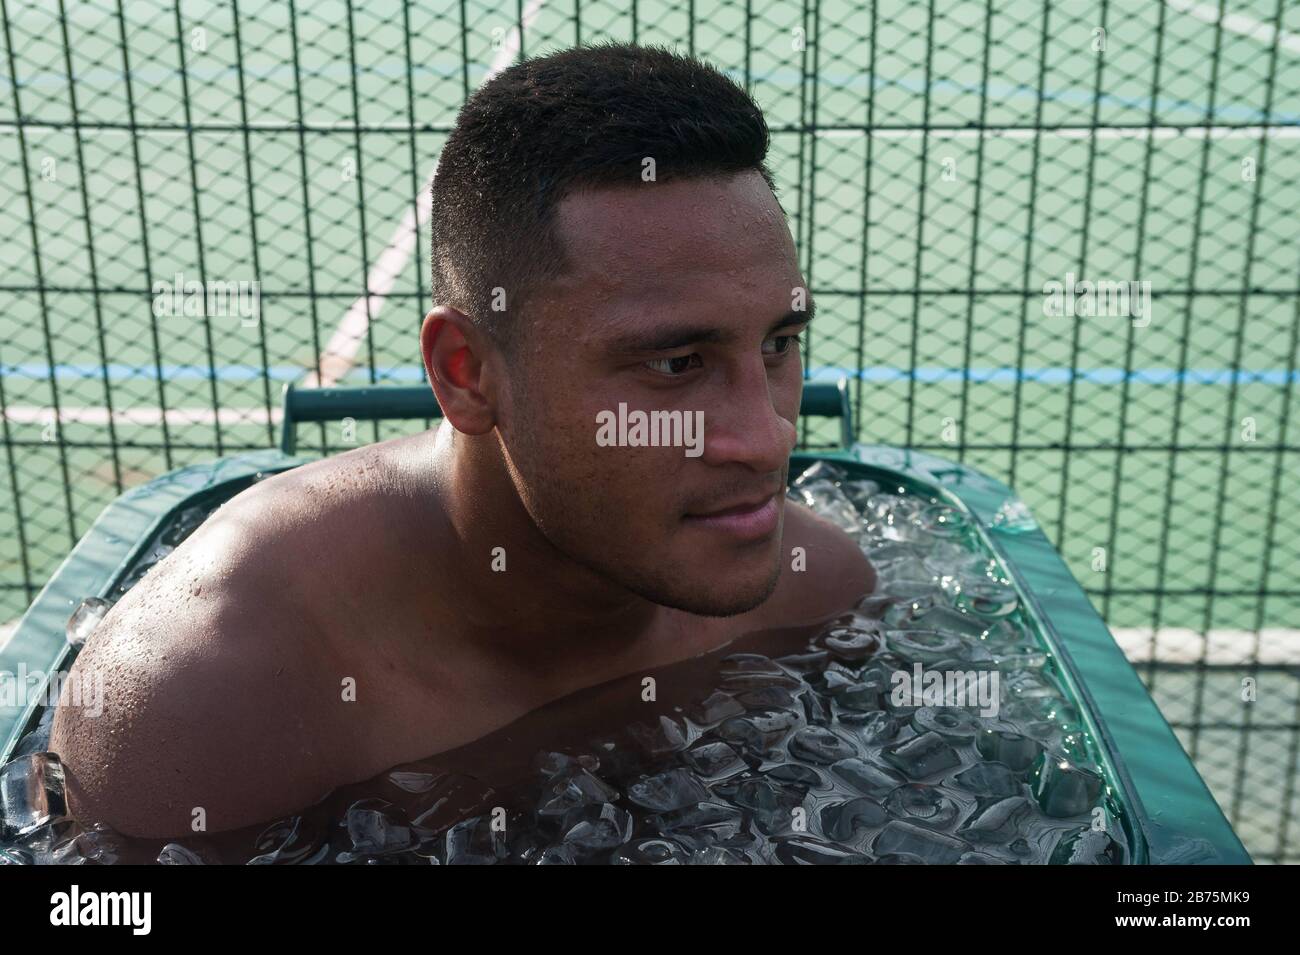 04.11.2017, Singapore, Republic of Singapore, Asia - After a game at the Rugby Sevens Tournament, Kepu Lokotui, player of the Australian rugby team Casuarina Cougars, cools down in a trash can filled with ice water.     Use for editorial purposes only [automated translation] Stock Photo